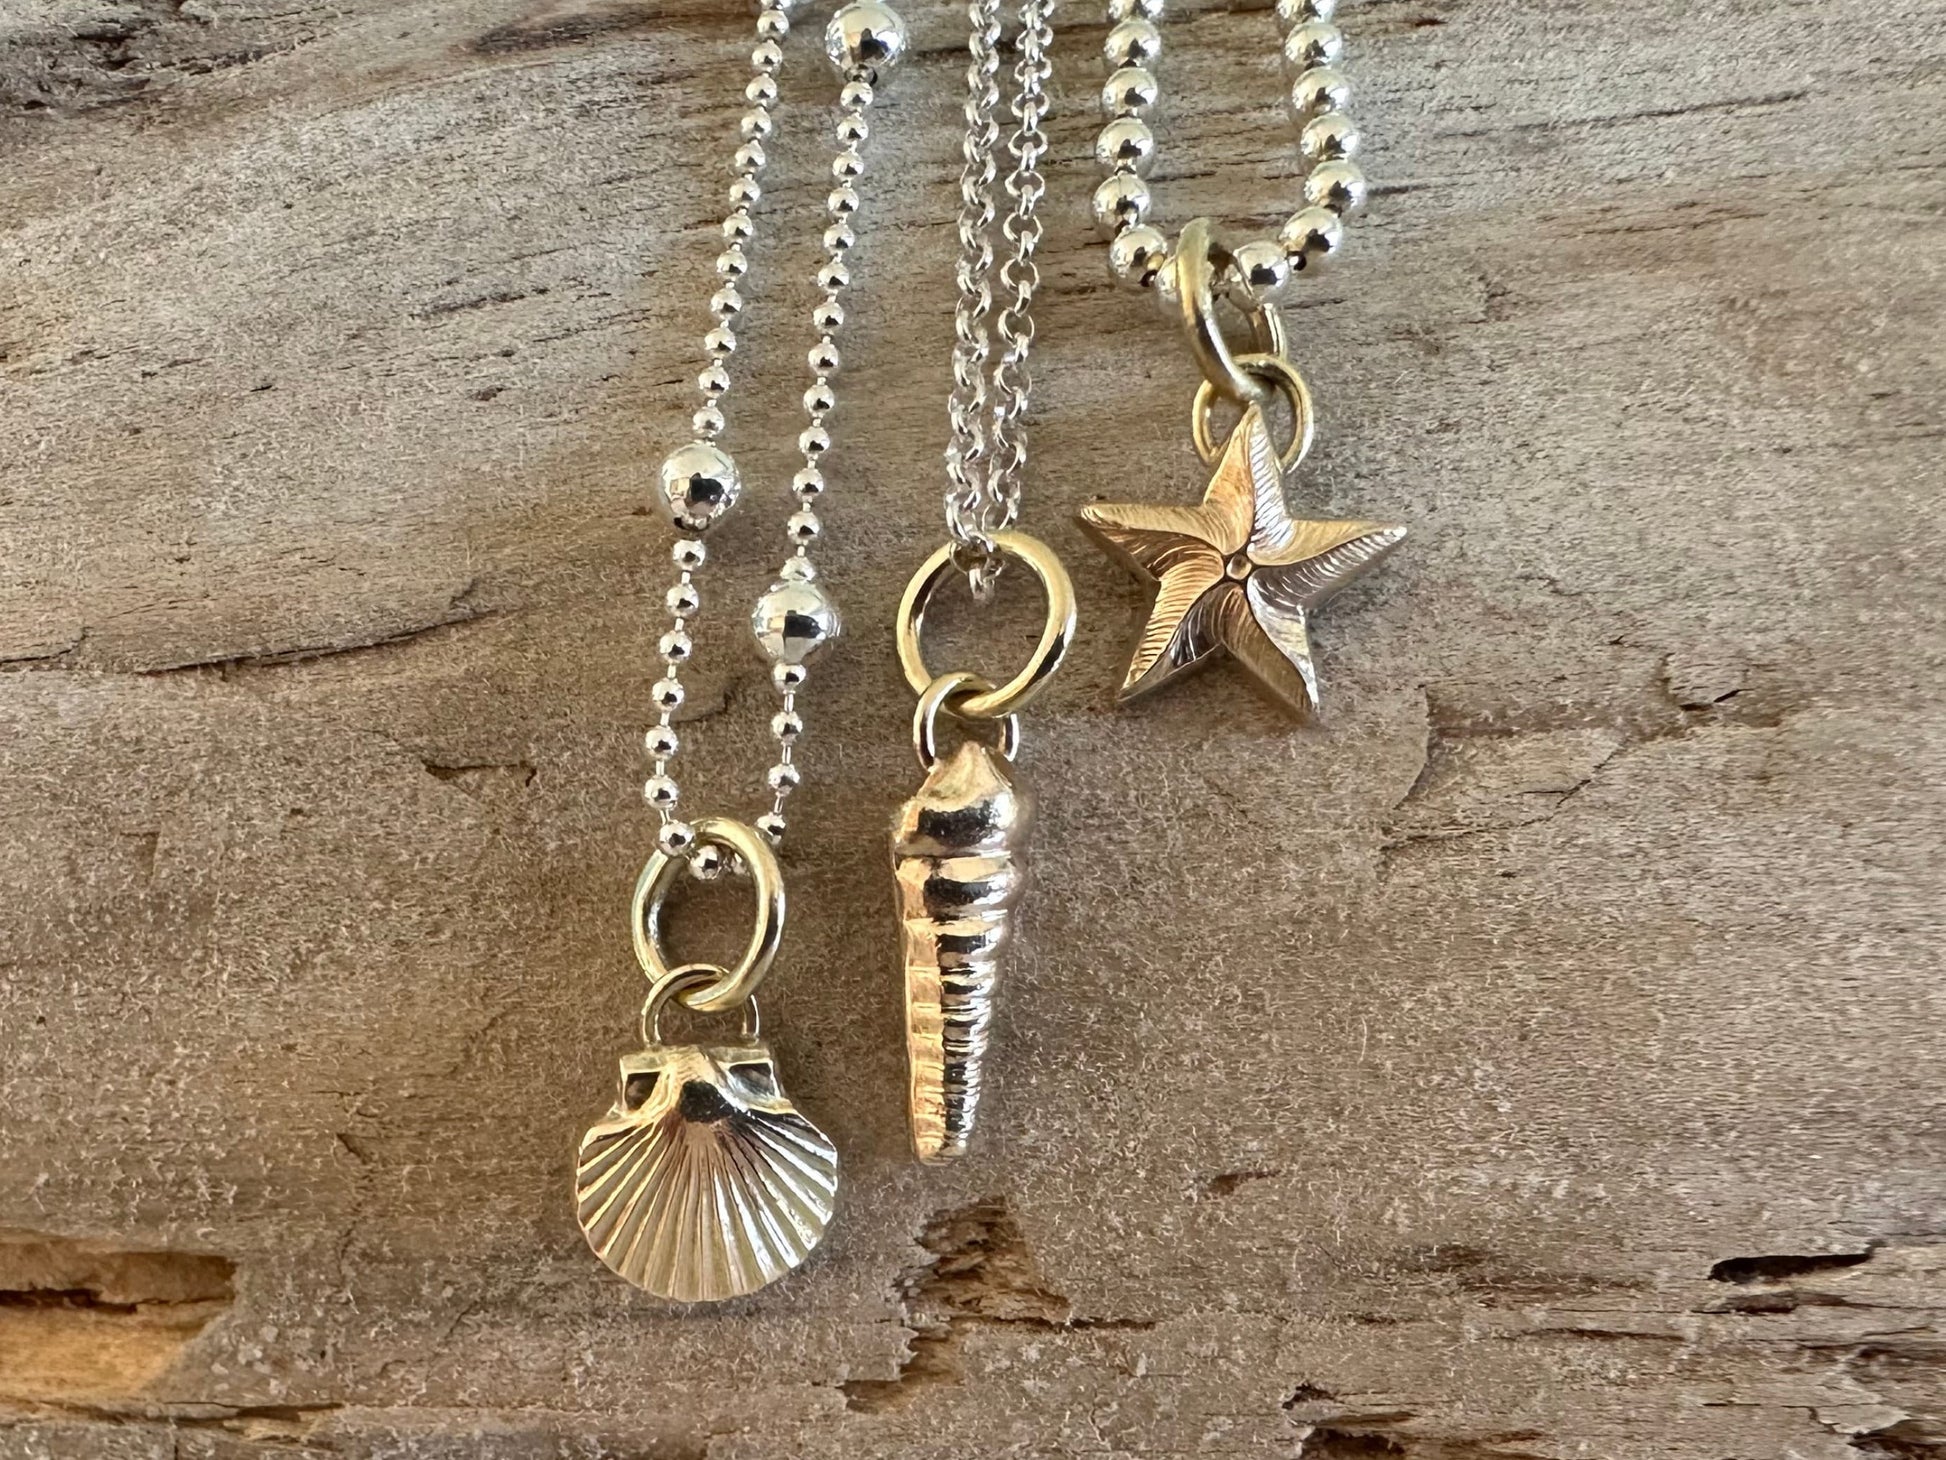 Solid 9ct gold Turritella Seashell pendant charm necklace, handmade from recycled 9ct gold, made to order